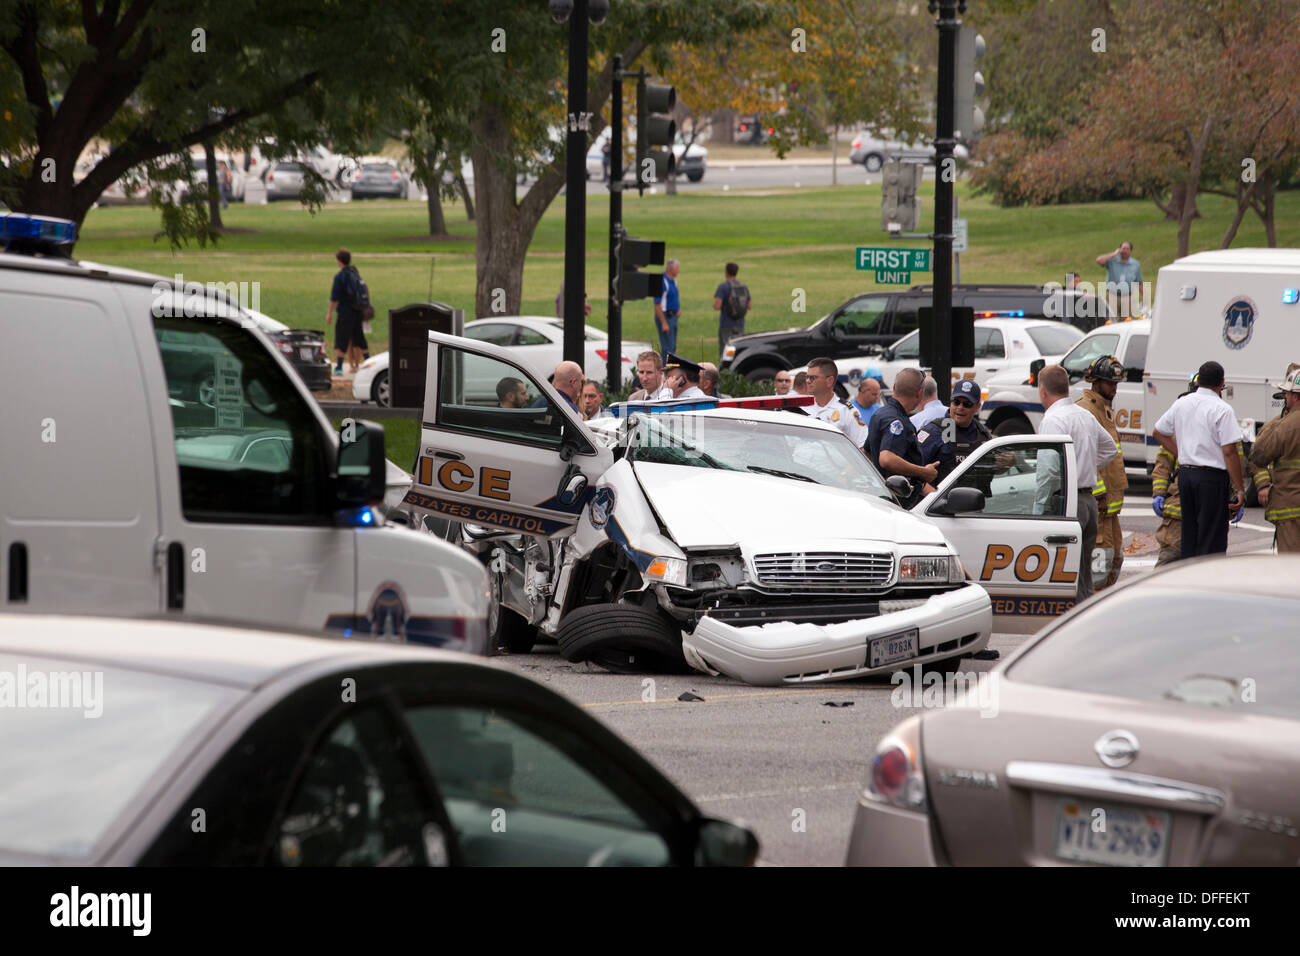 Washington, DC, USA. 3rd Oct, 2013:  US Secret Service and Capitol Police chase a woman who tried to ram security gate at the White House with her car.  A car chase ensues from the White House to the US Capitol building.  The chase ends in a crash, shots are fired by Capitol Police.  The woman driver is confirmed dead, a Capitol Policeman is injured. © B Christopher/Alamy Live News Stock Photo